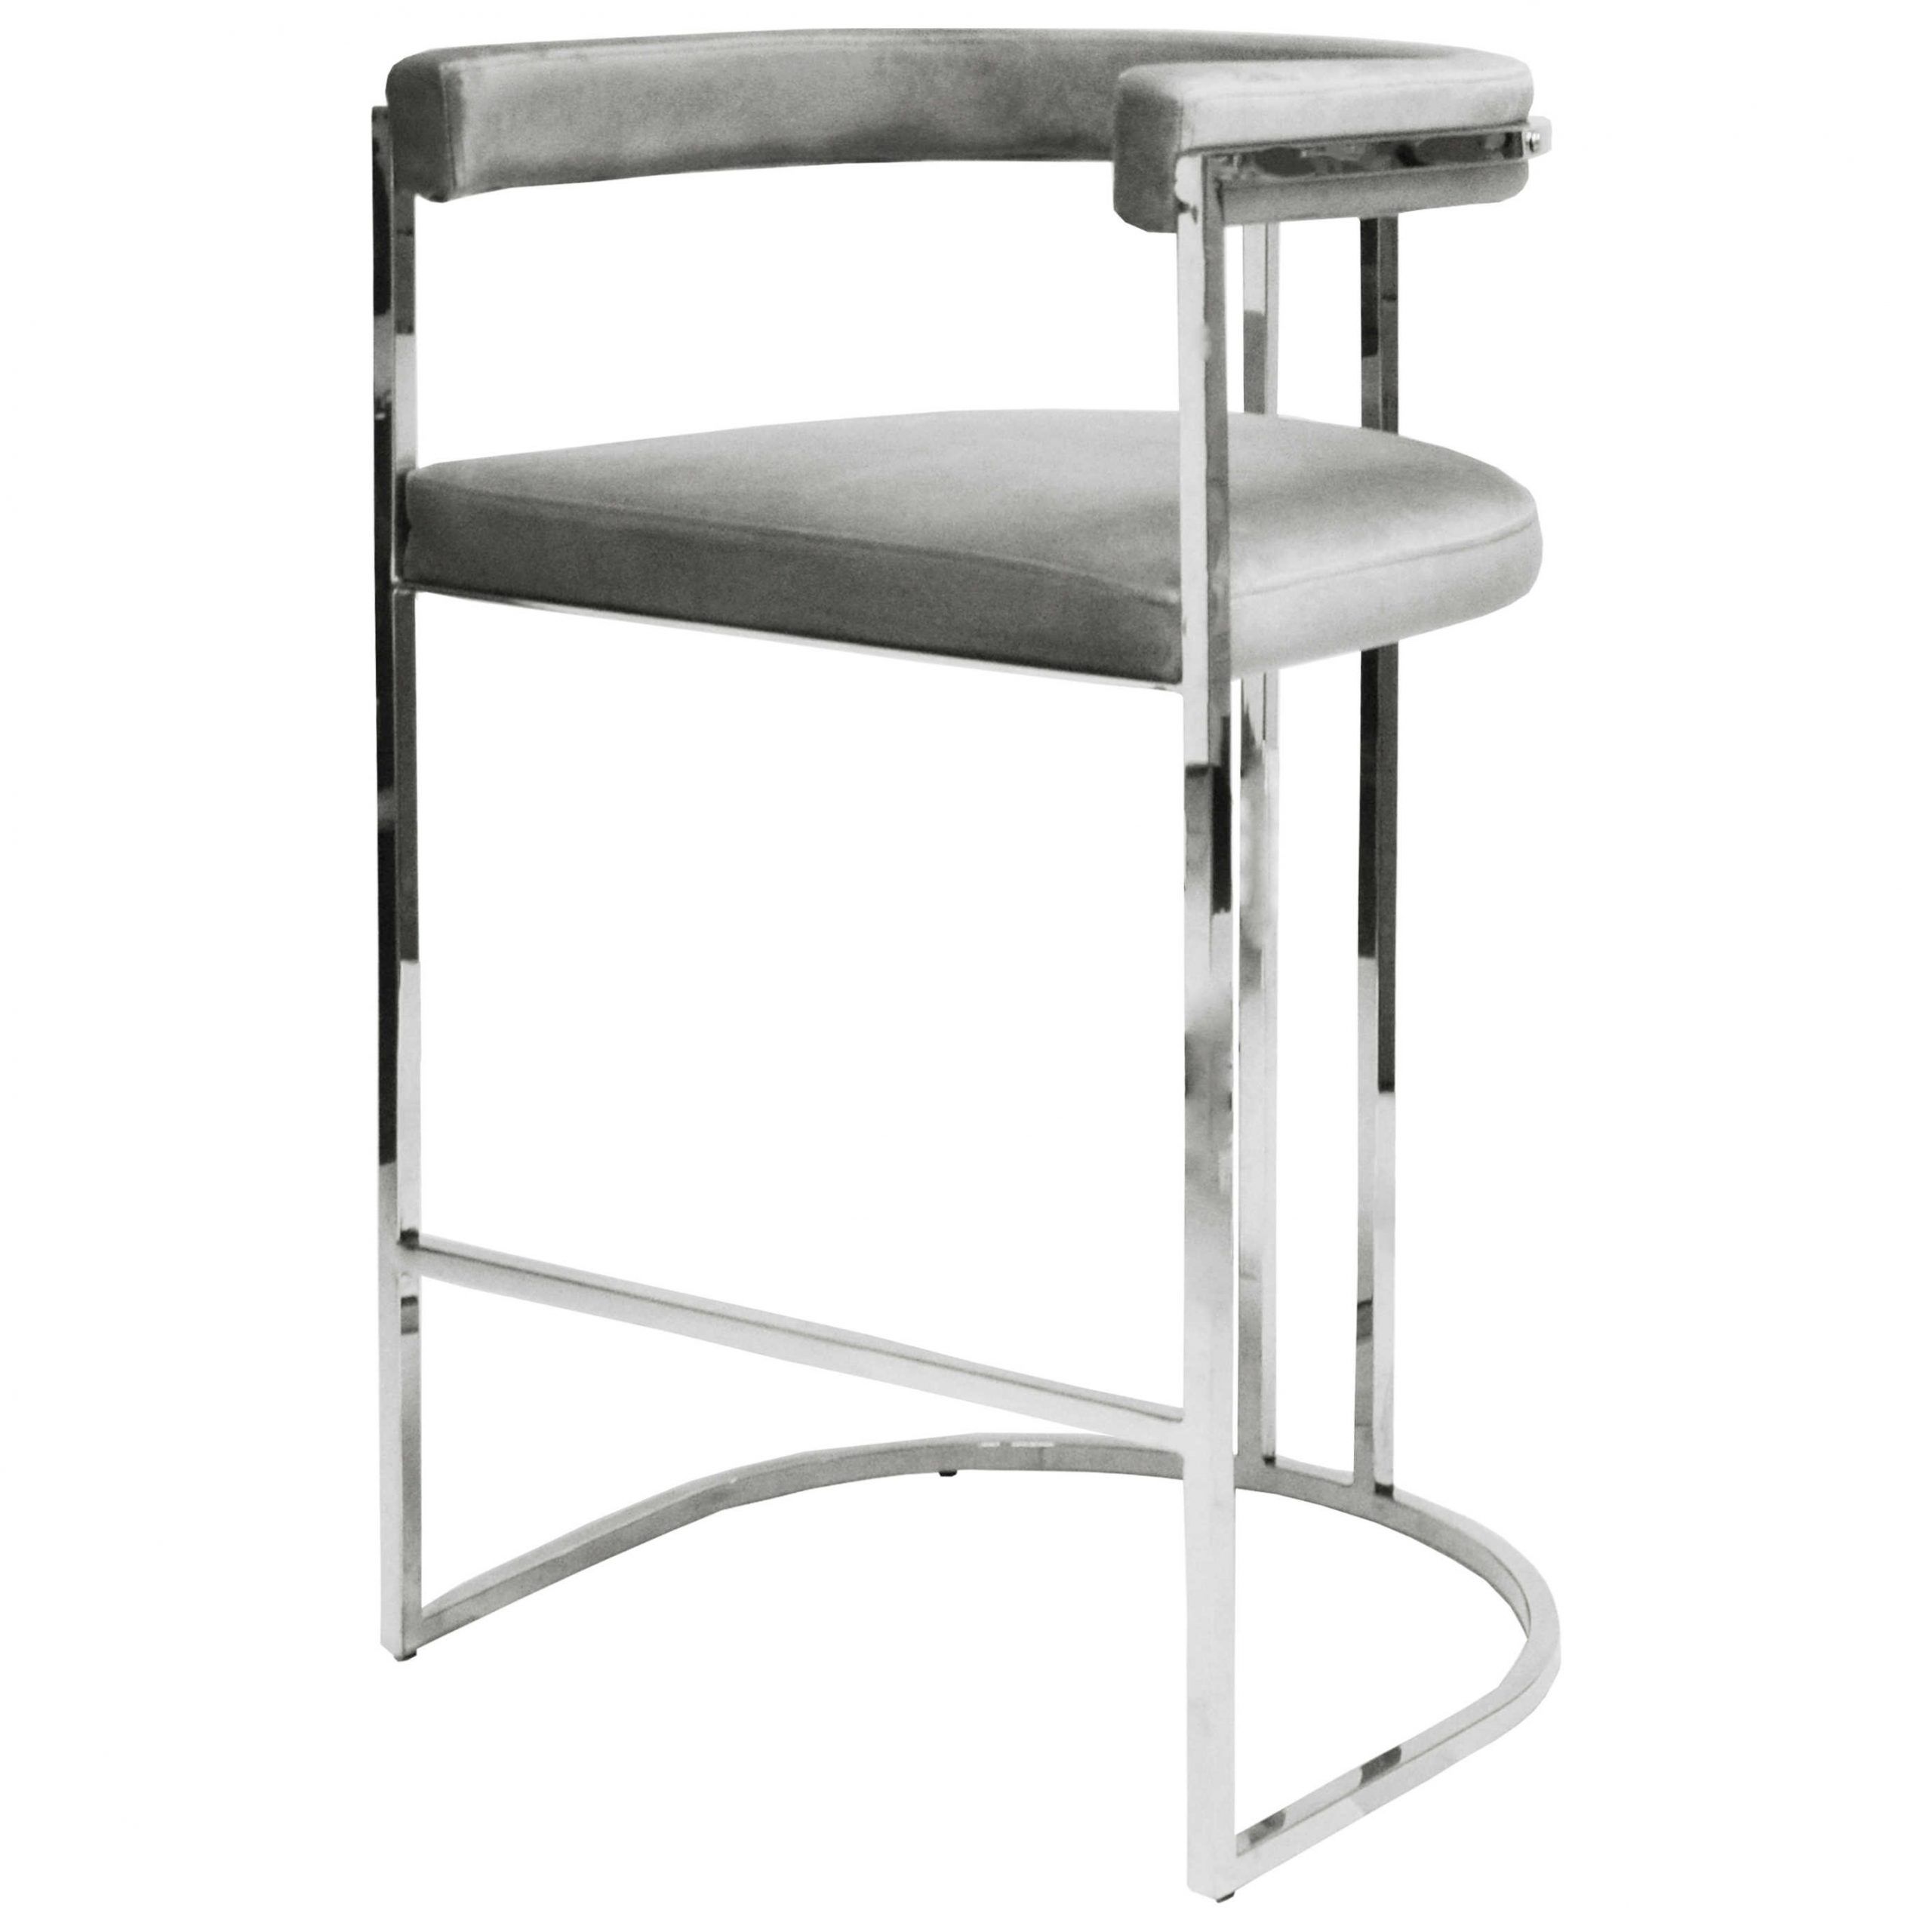 Worlds Away Grey Velvet / Nickel Arm Bar Height Stool | Wadonovanngry Intended For Gray Nickel Stools (View 2 of 20)